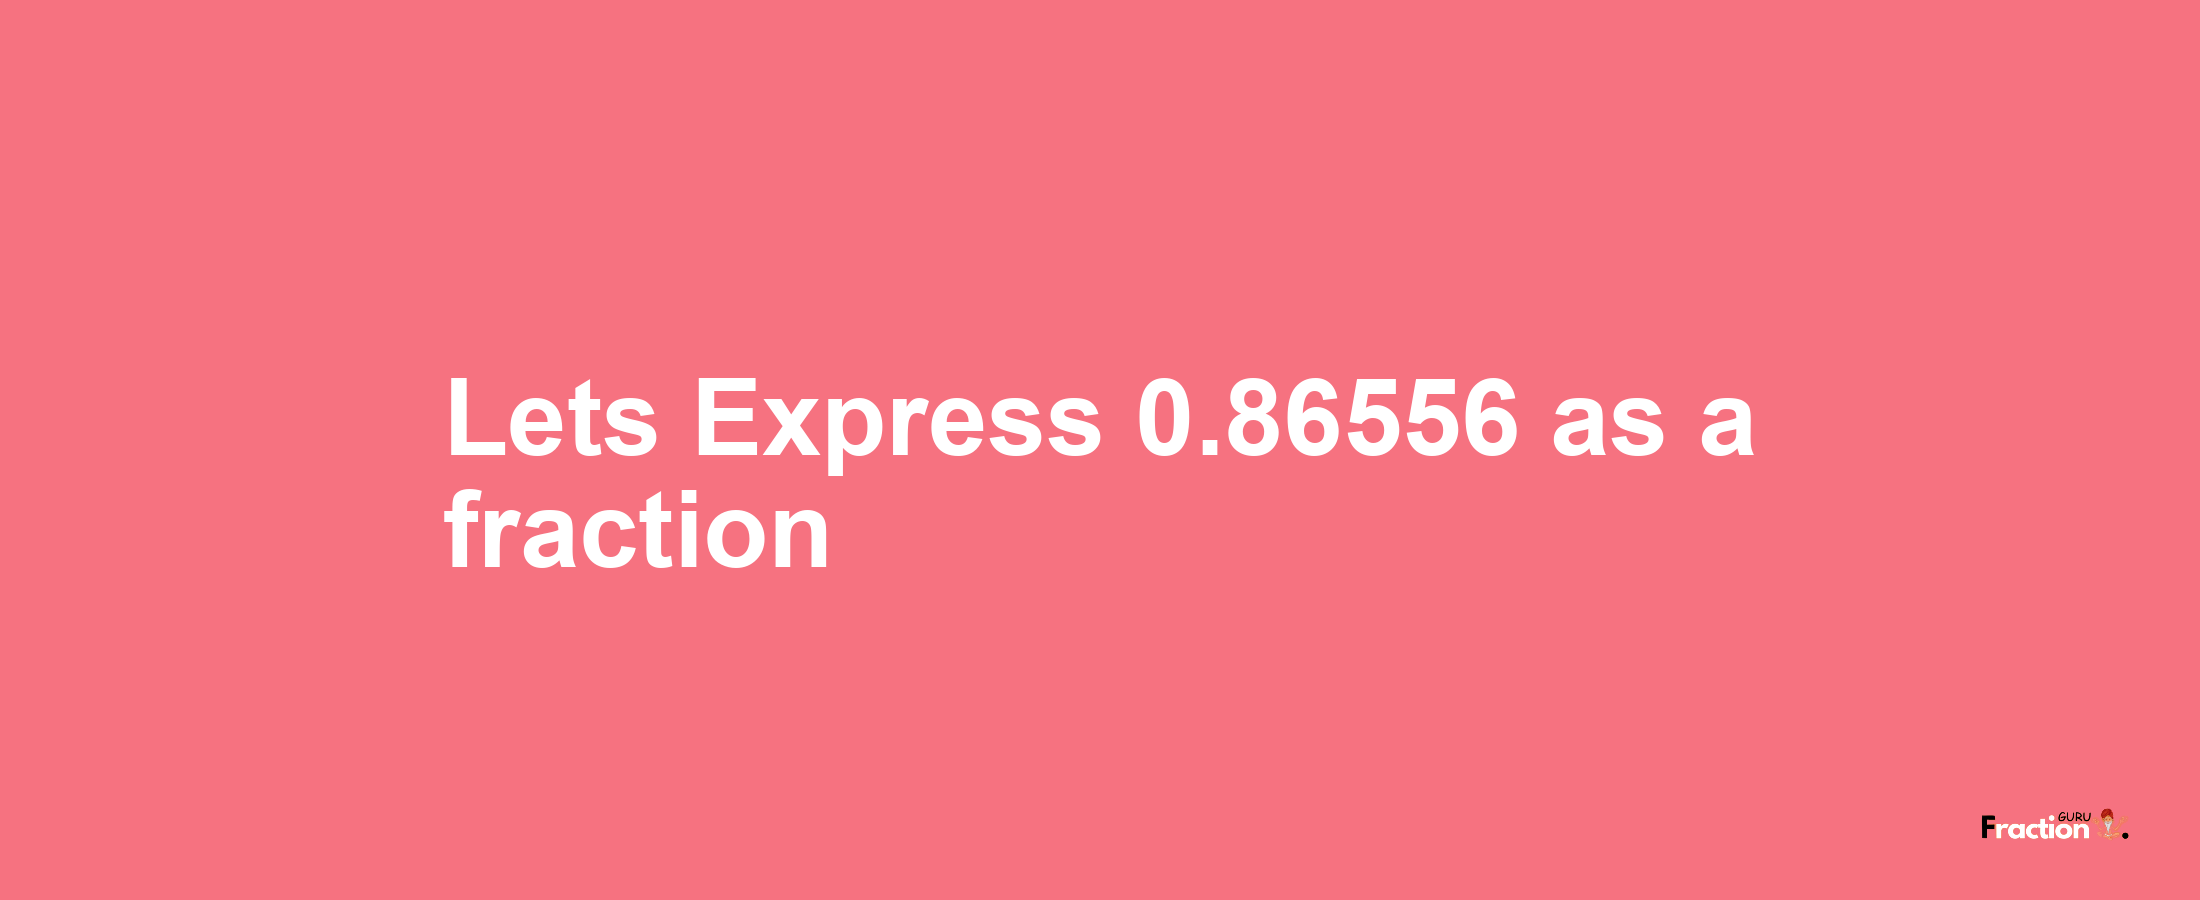 Lets Express 0.86556 as afraction